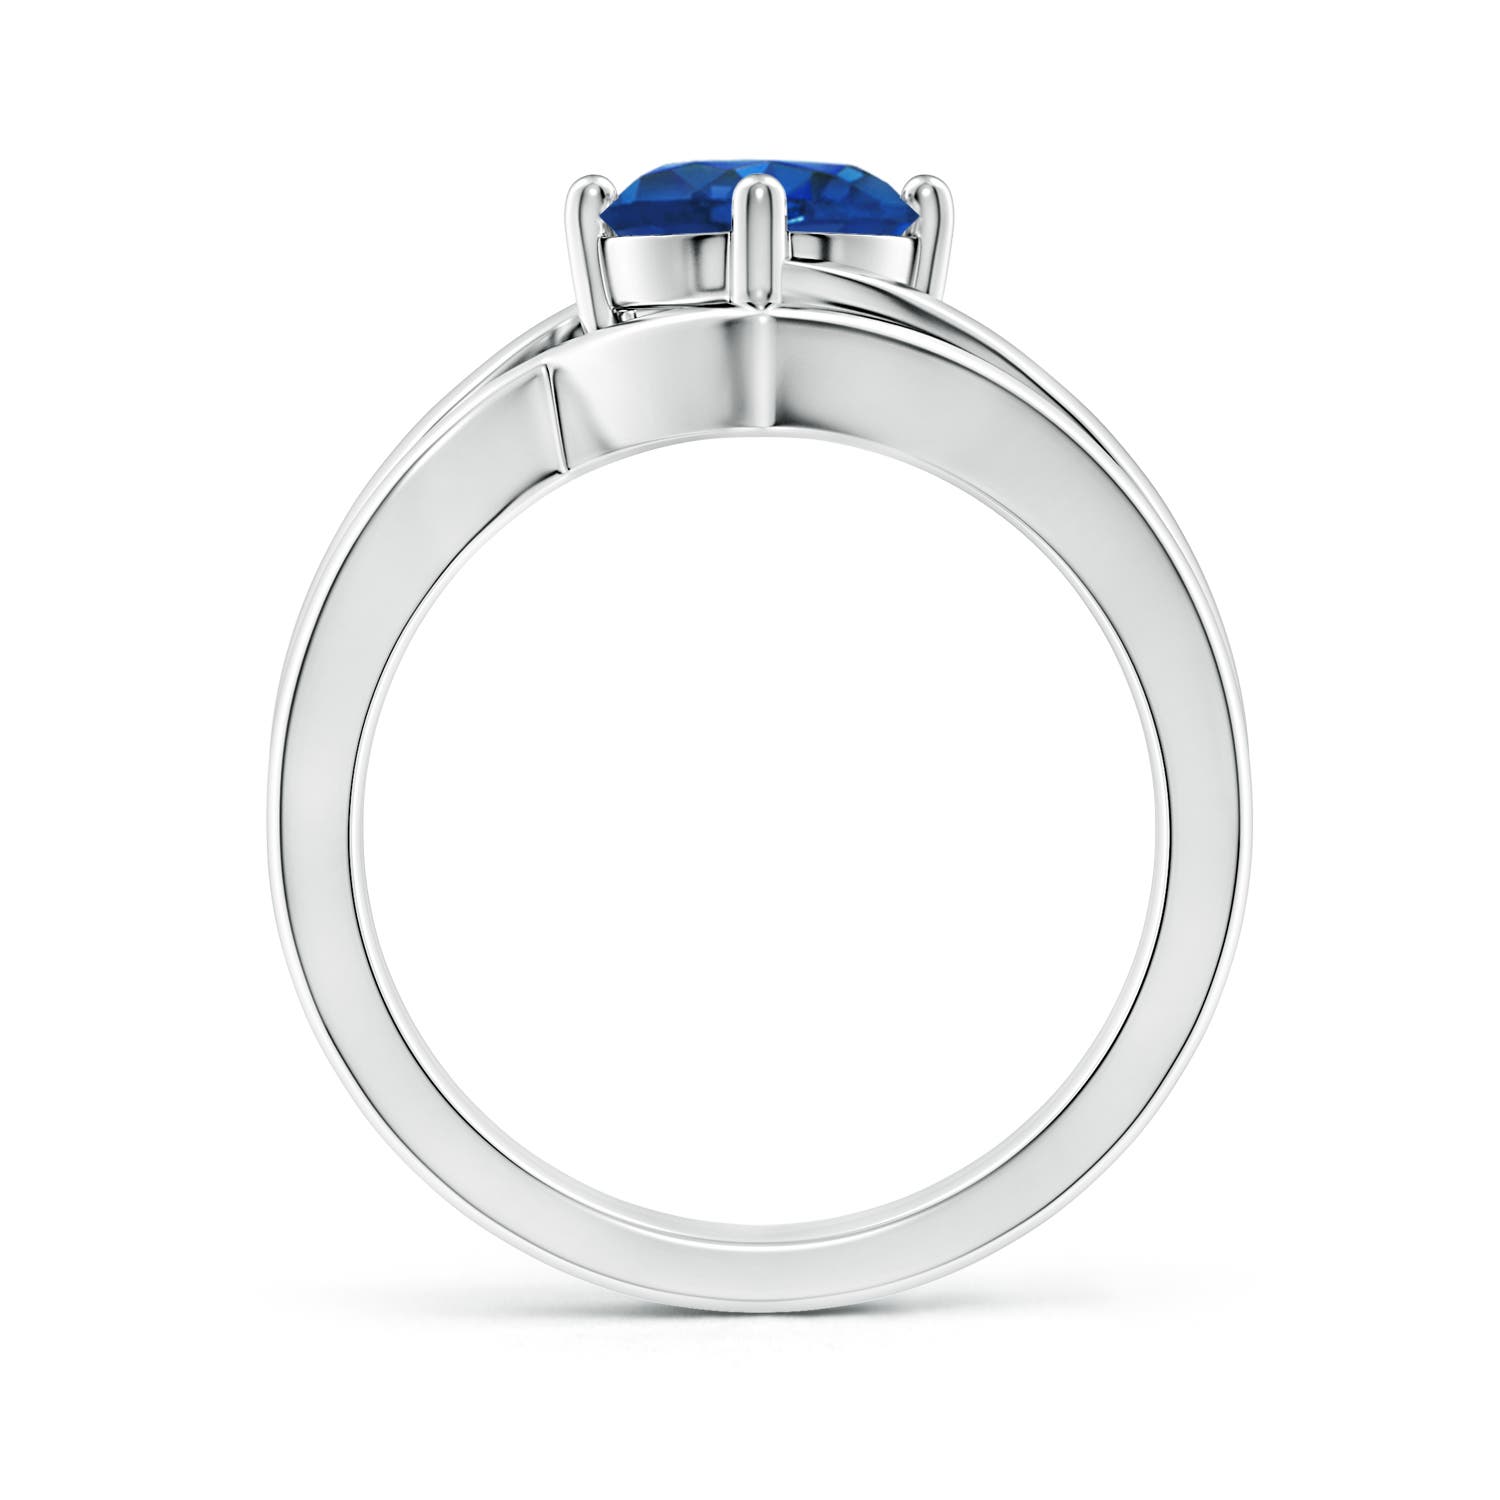 AAA - Blue Sapphire / 1.6 CT / 14 KT White Gold